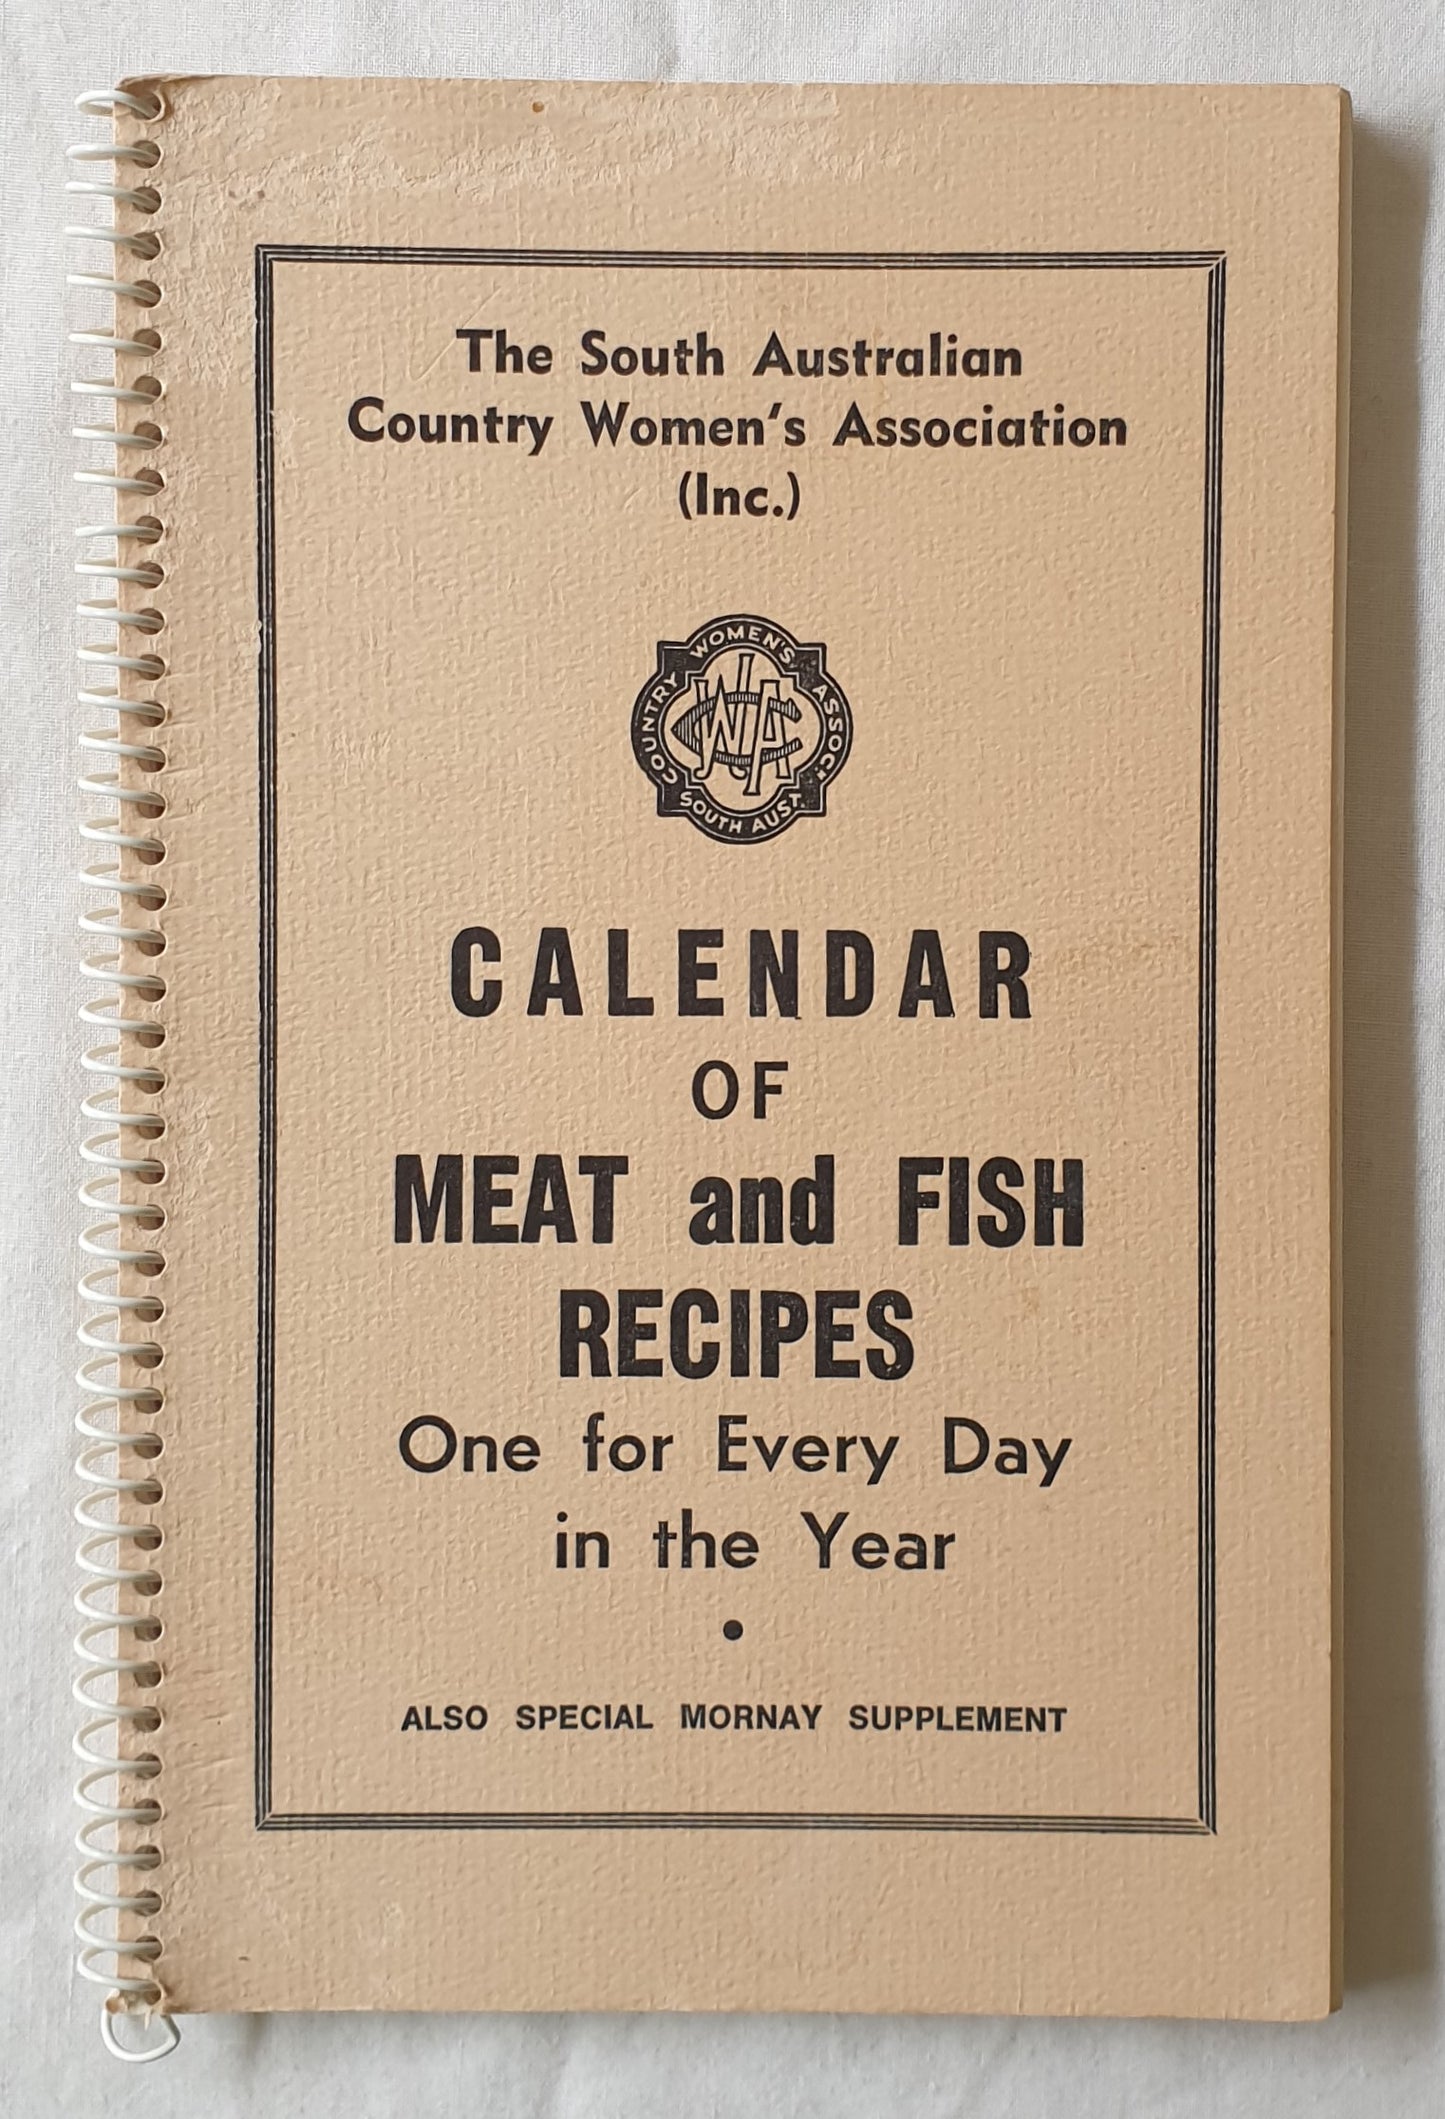 Calendar of Meat and Fish Recipes by The South Australian Country Women’s Association